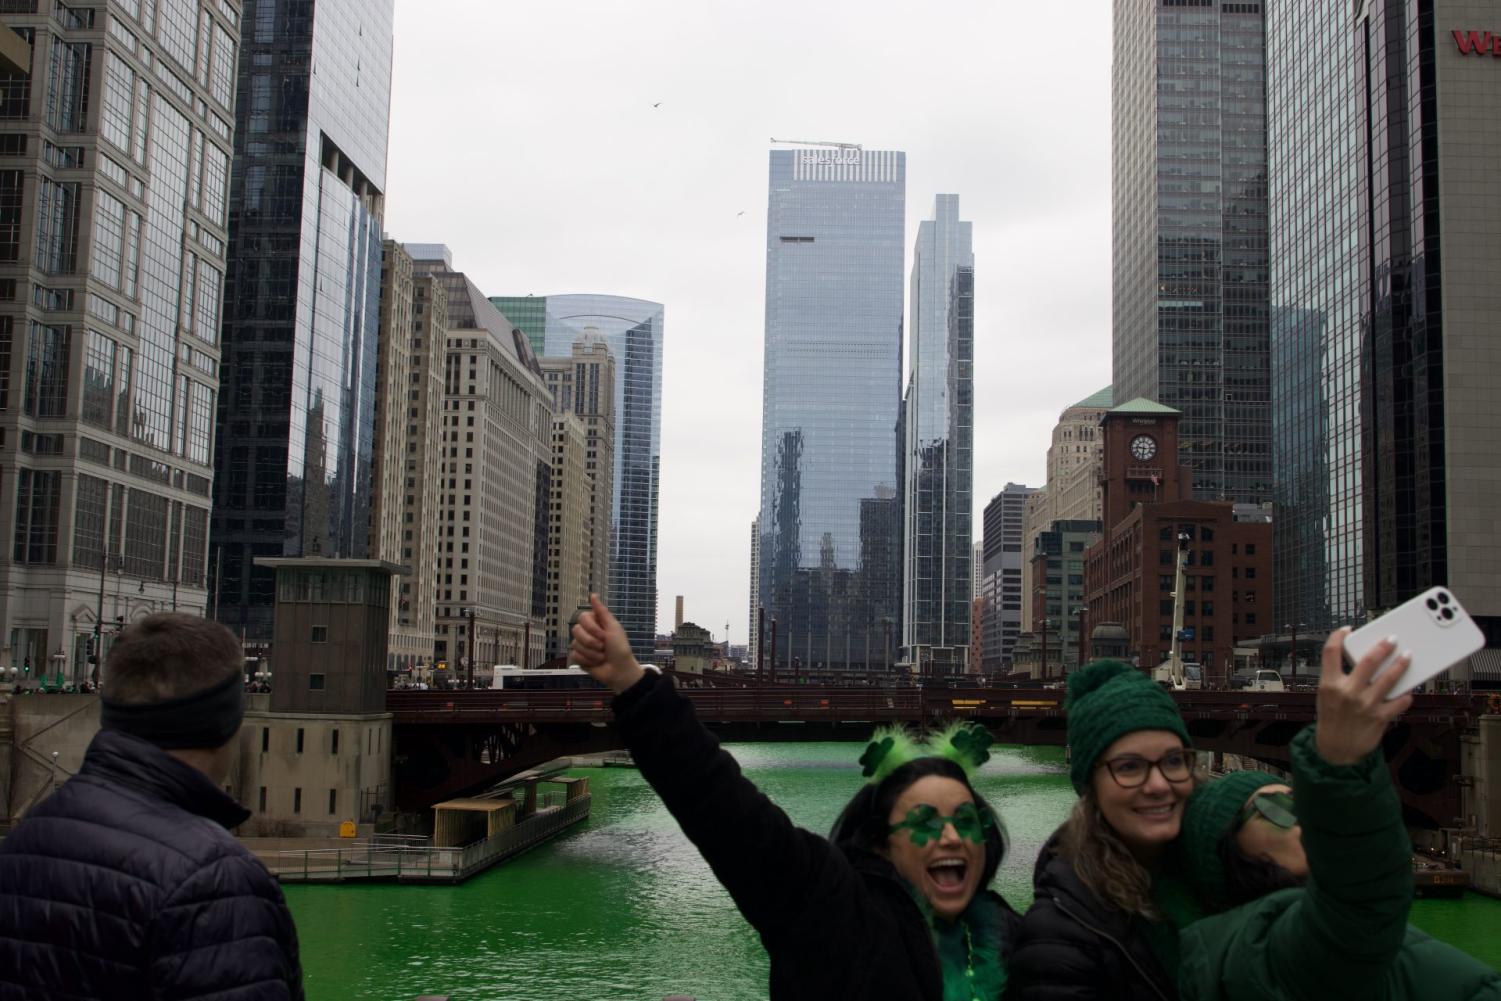 GALLERY%3A+Going+Green+-+St.+Patricks+Day+in+Chicago